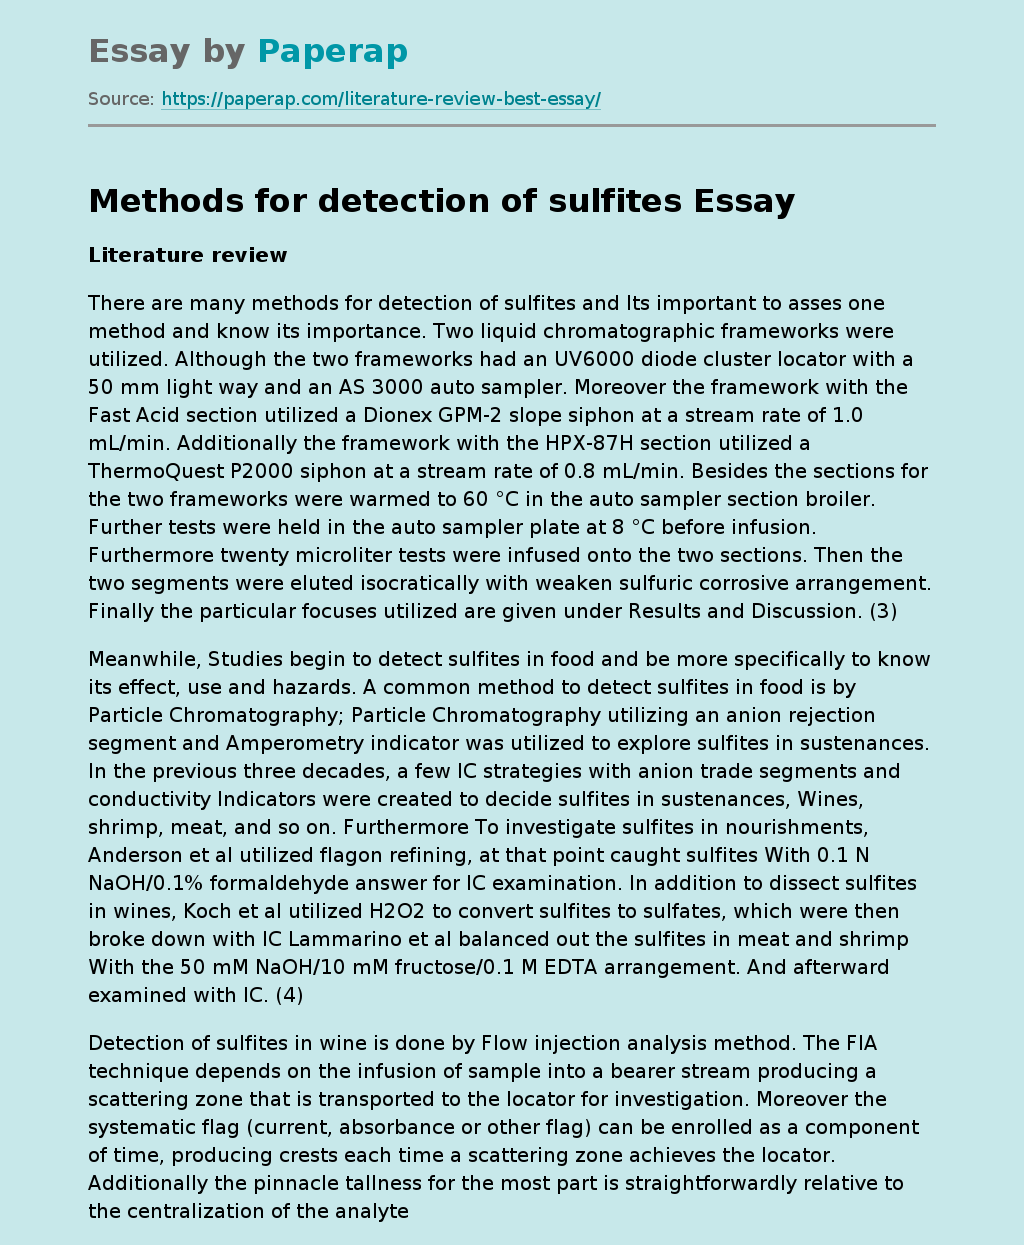 Methods for detection of sulfites